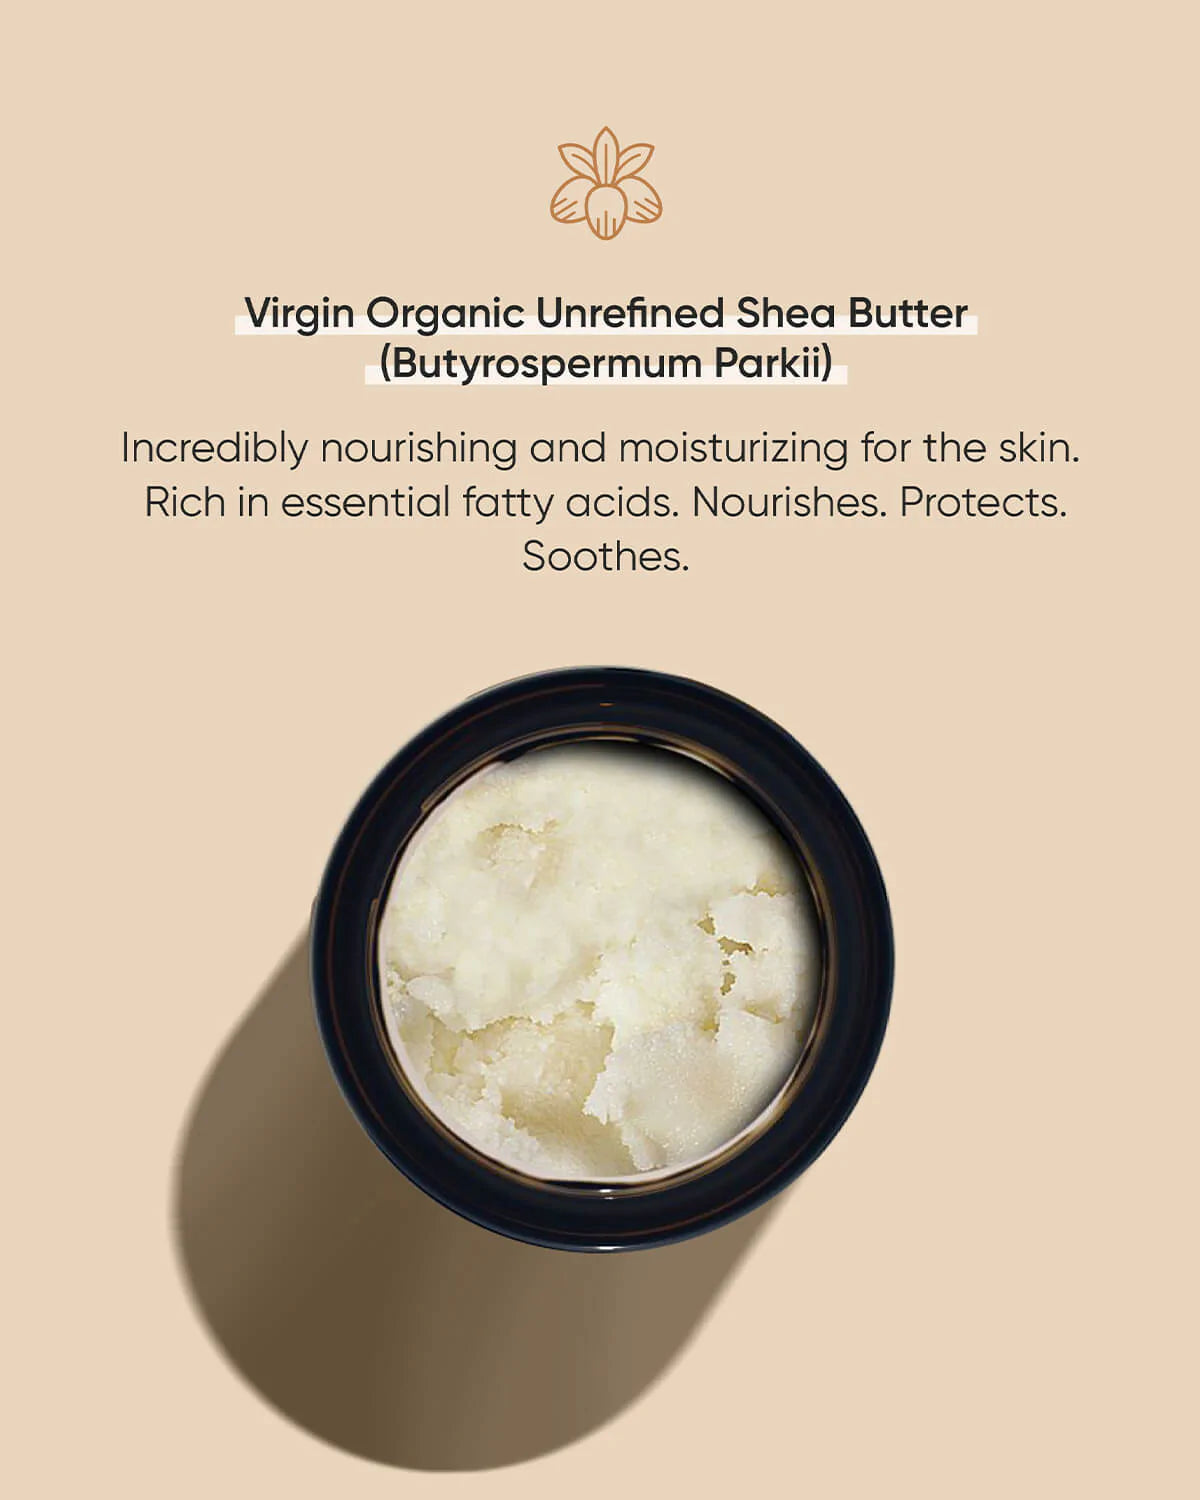 Scented Whipped Body Butter Deep Skin Moisturizer with Unrefined Shea Butter